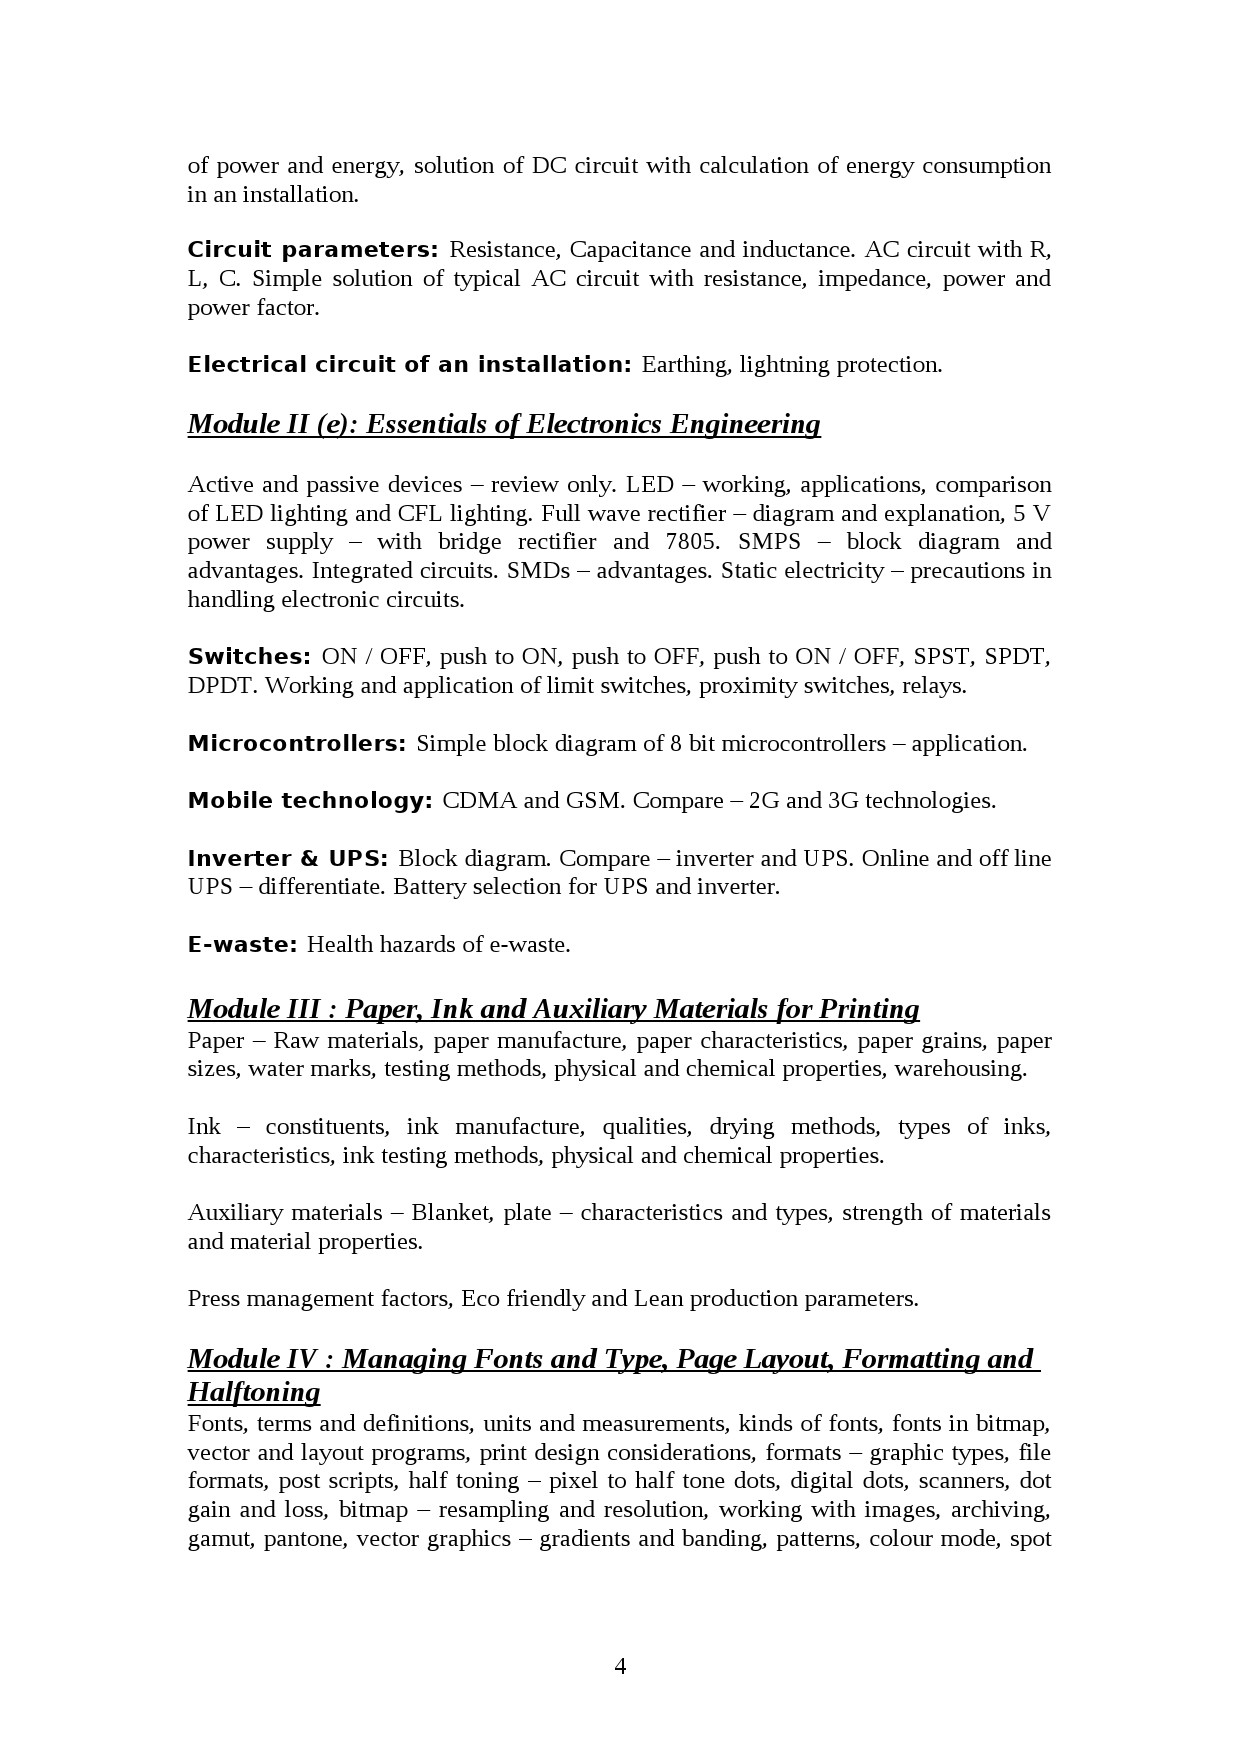 Printing Technology Lecturer in Polytechnic Exam Syllabus - Notification Image 4